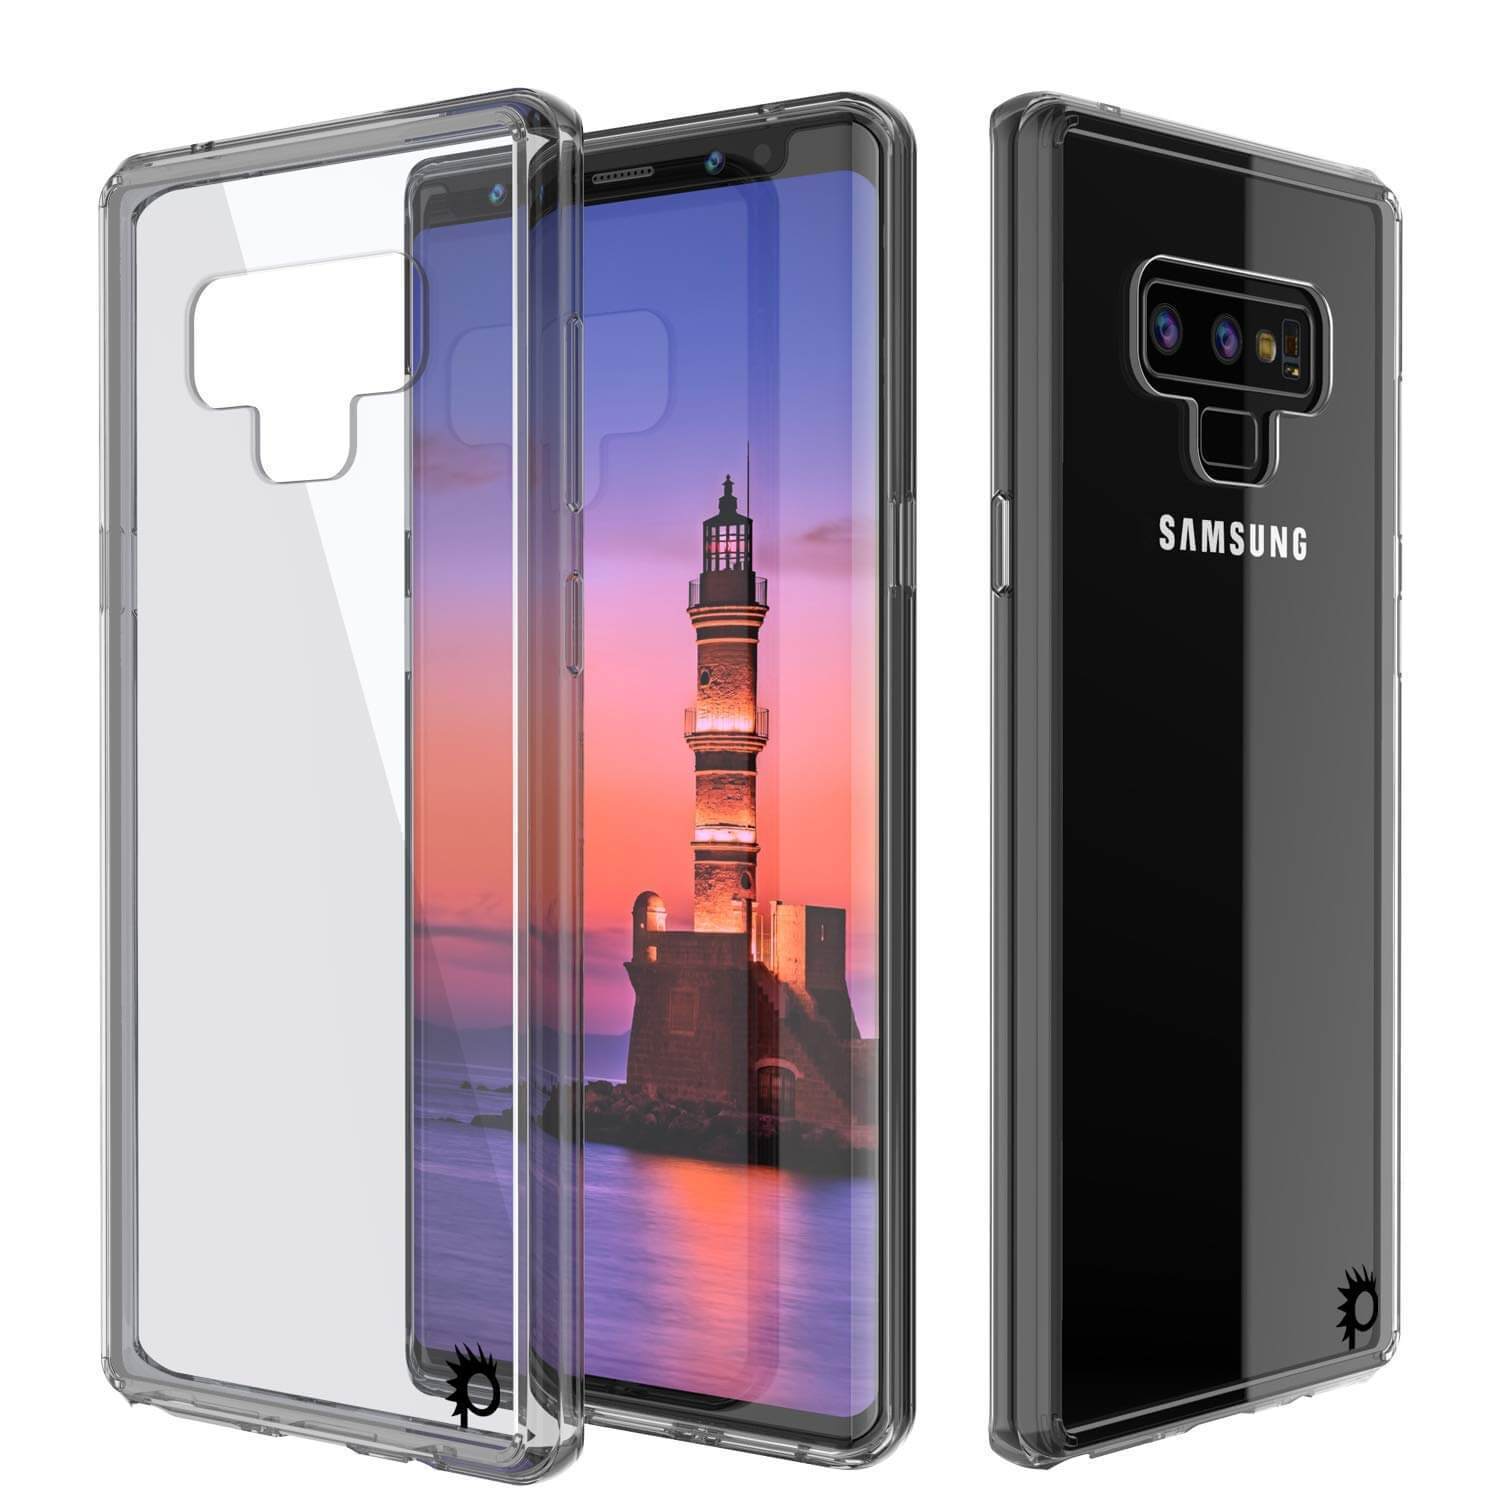 Galaxy Note 10 Punkcase Lucid-2.0 Series Slim Fit Armor Crystal Black Case Cover